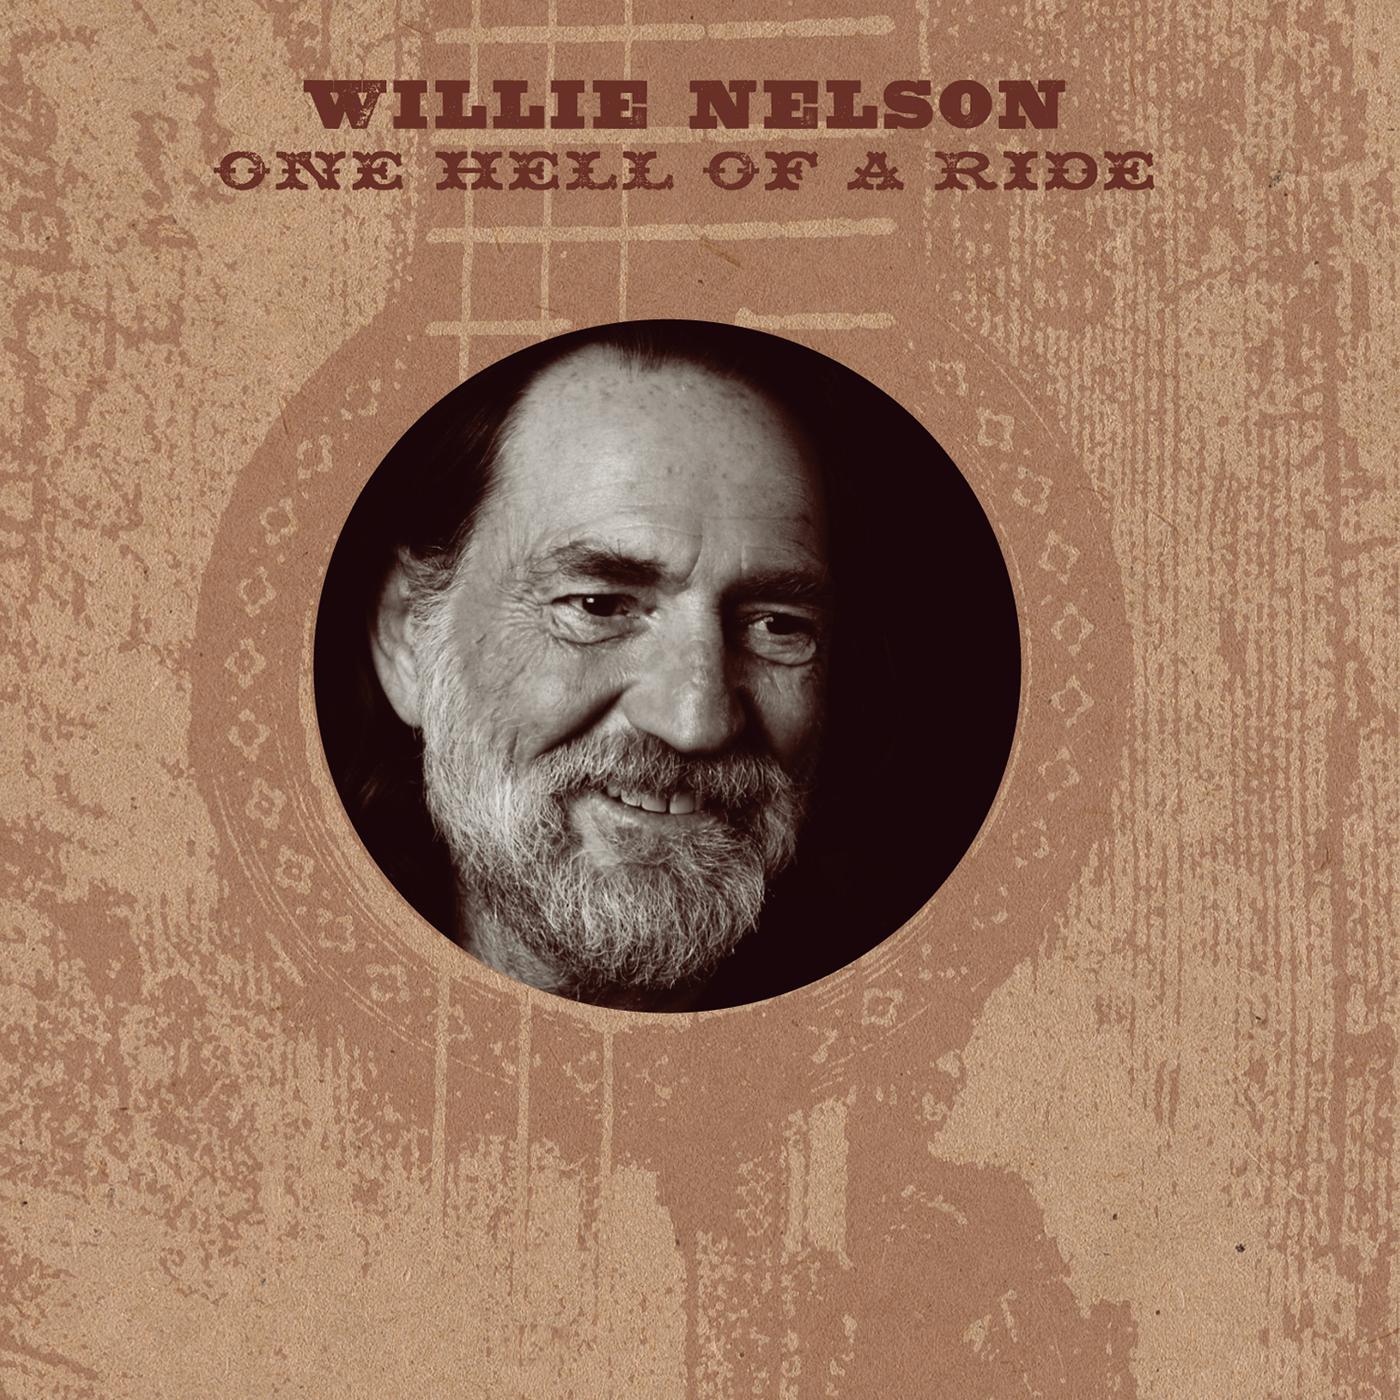 willie nelson coldplay song